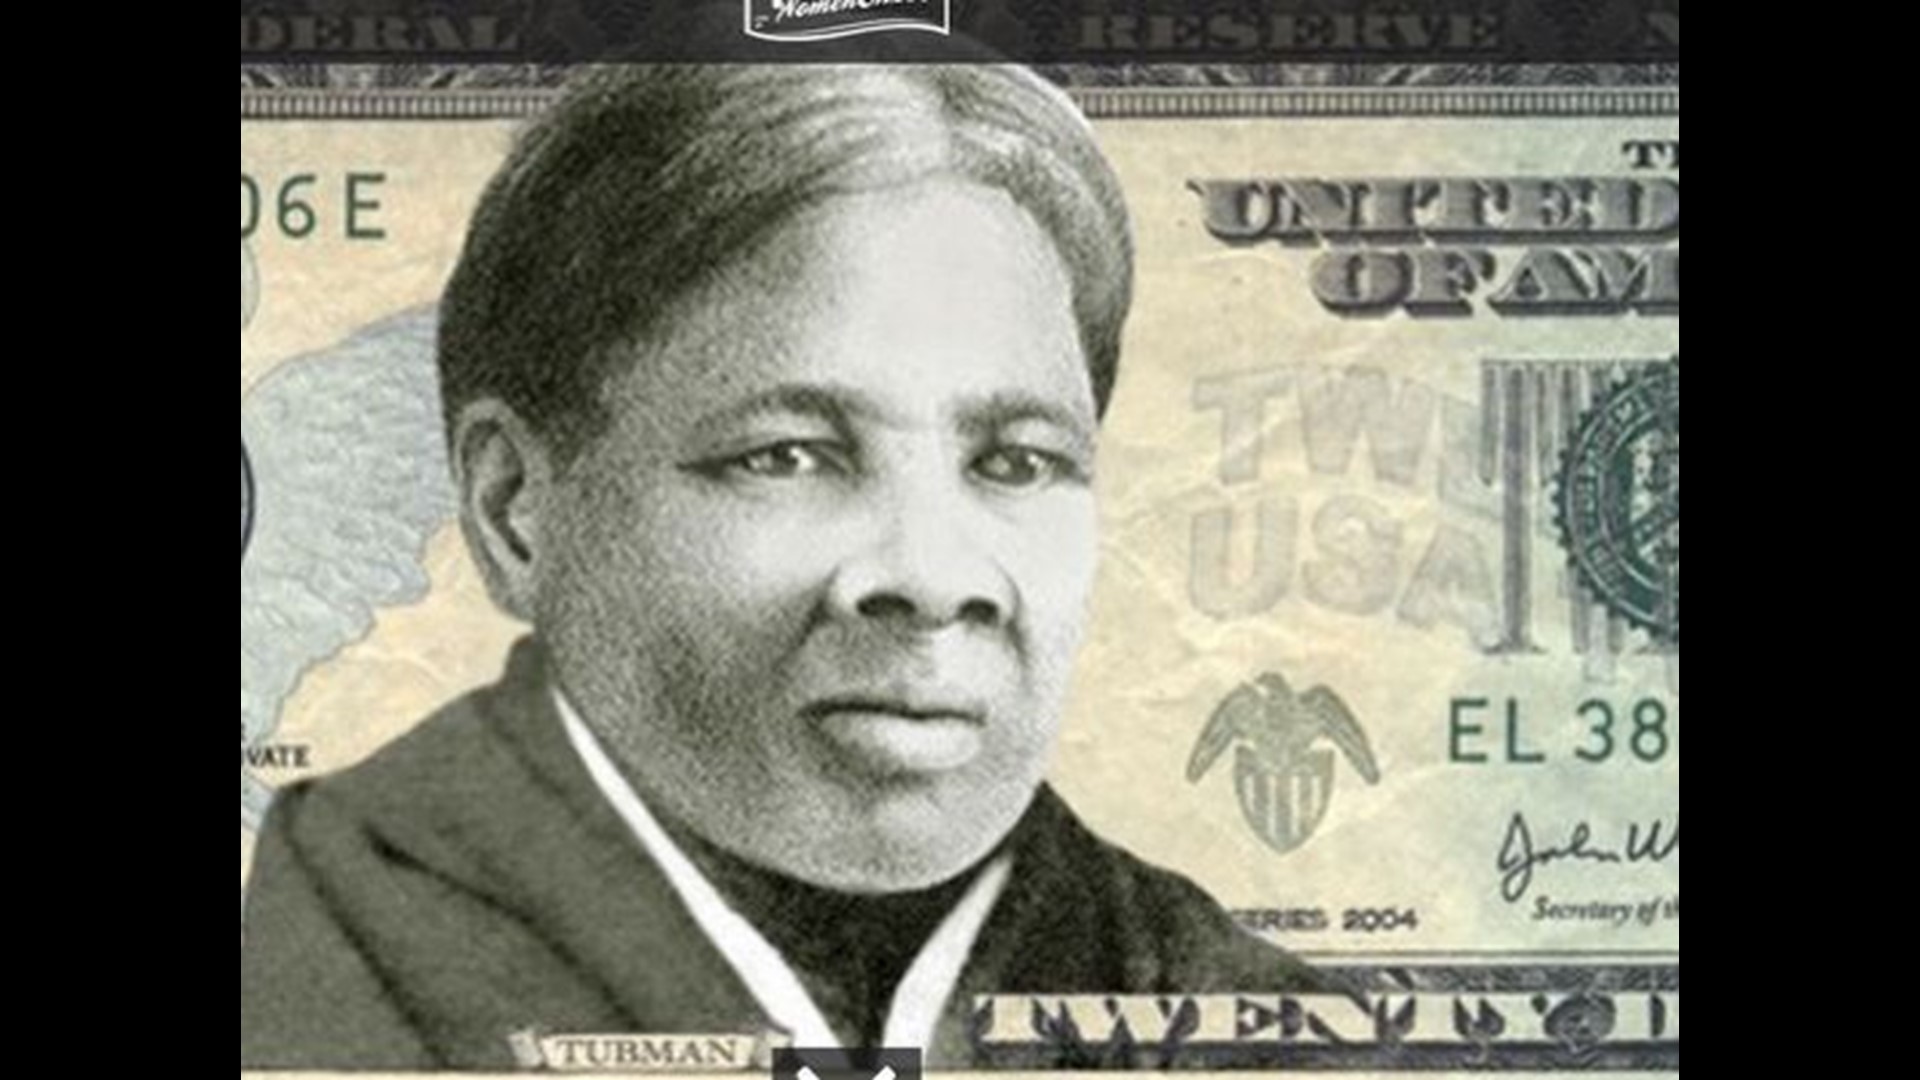 Pictures have circulated online of Harriet Tubman stamped on a $20 bill, instead of Andrew Jackson. Is it legit?